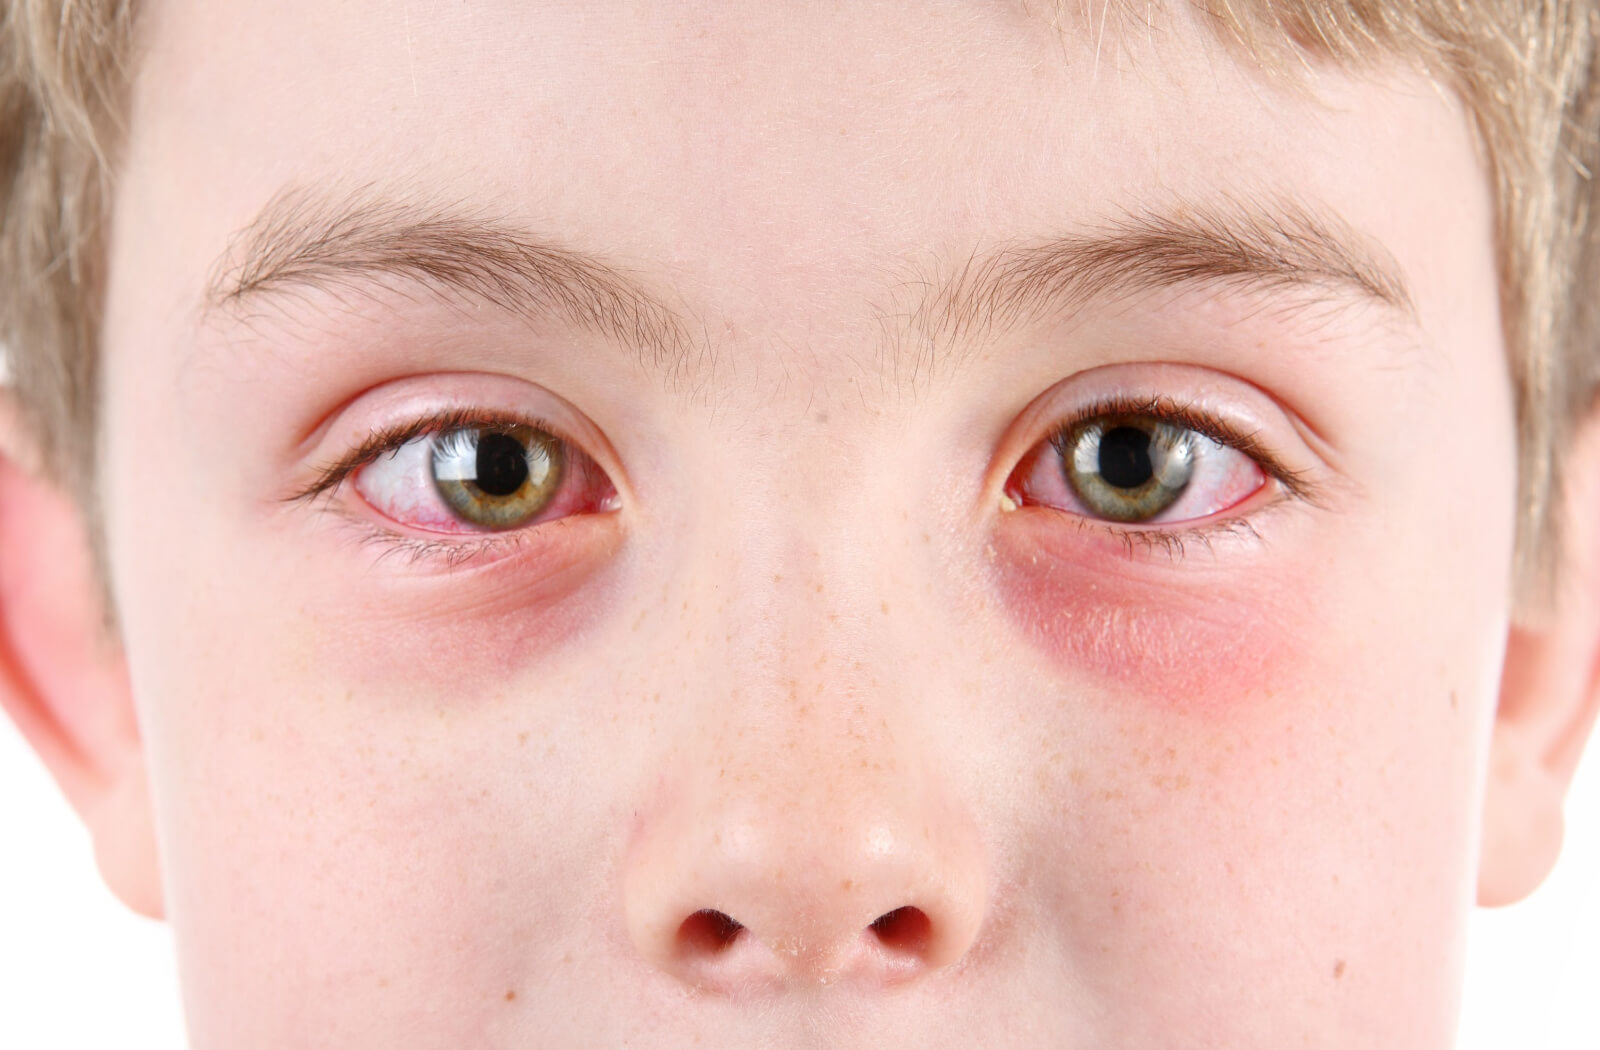 Stye on the Eyelid: Causes, Treatment, and More